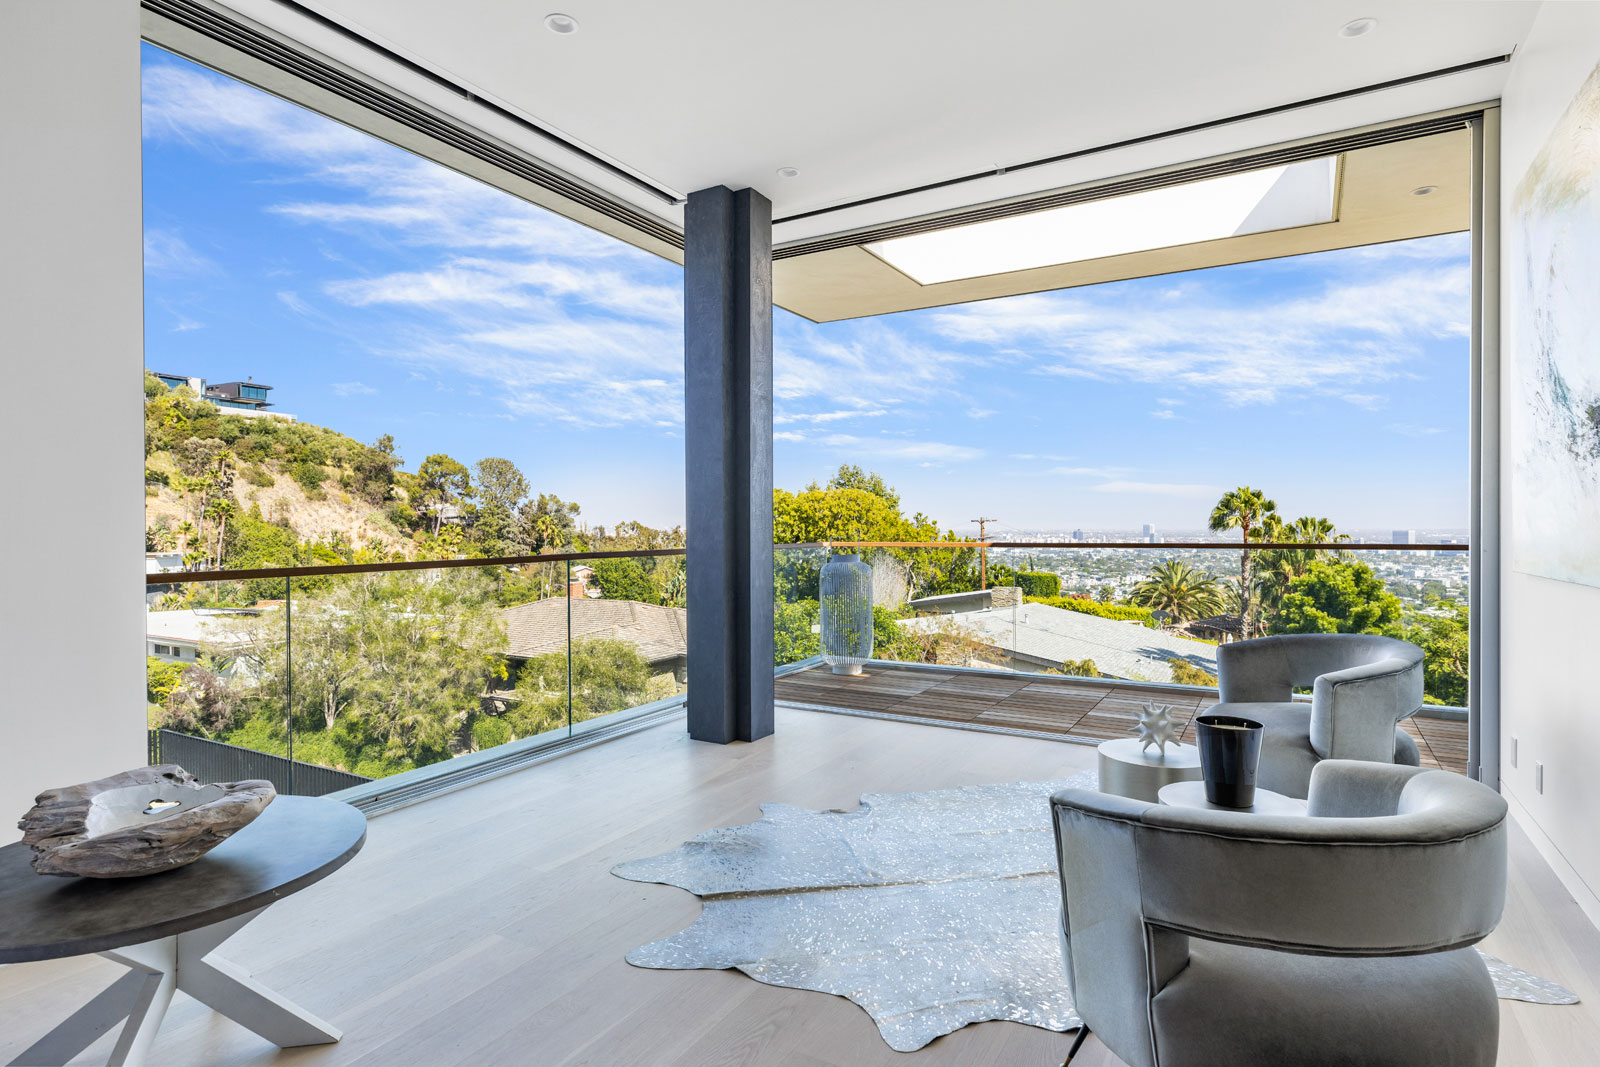 Looking out of the master suite. Photo: Photo: © Anthony Barcelo, Barcelo Photography